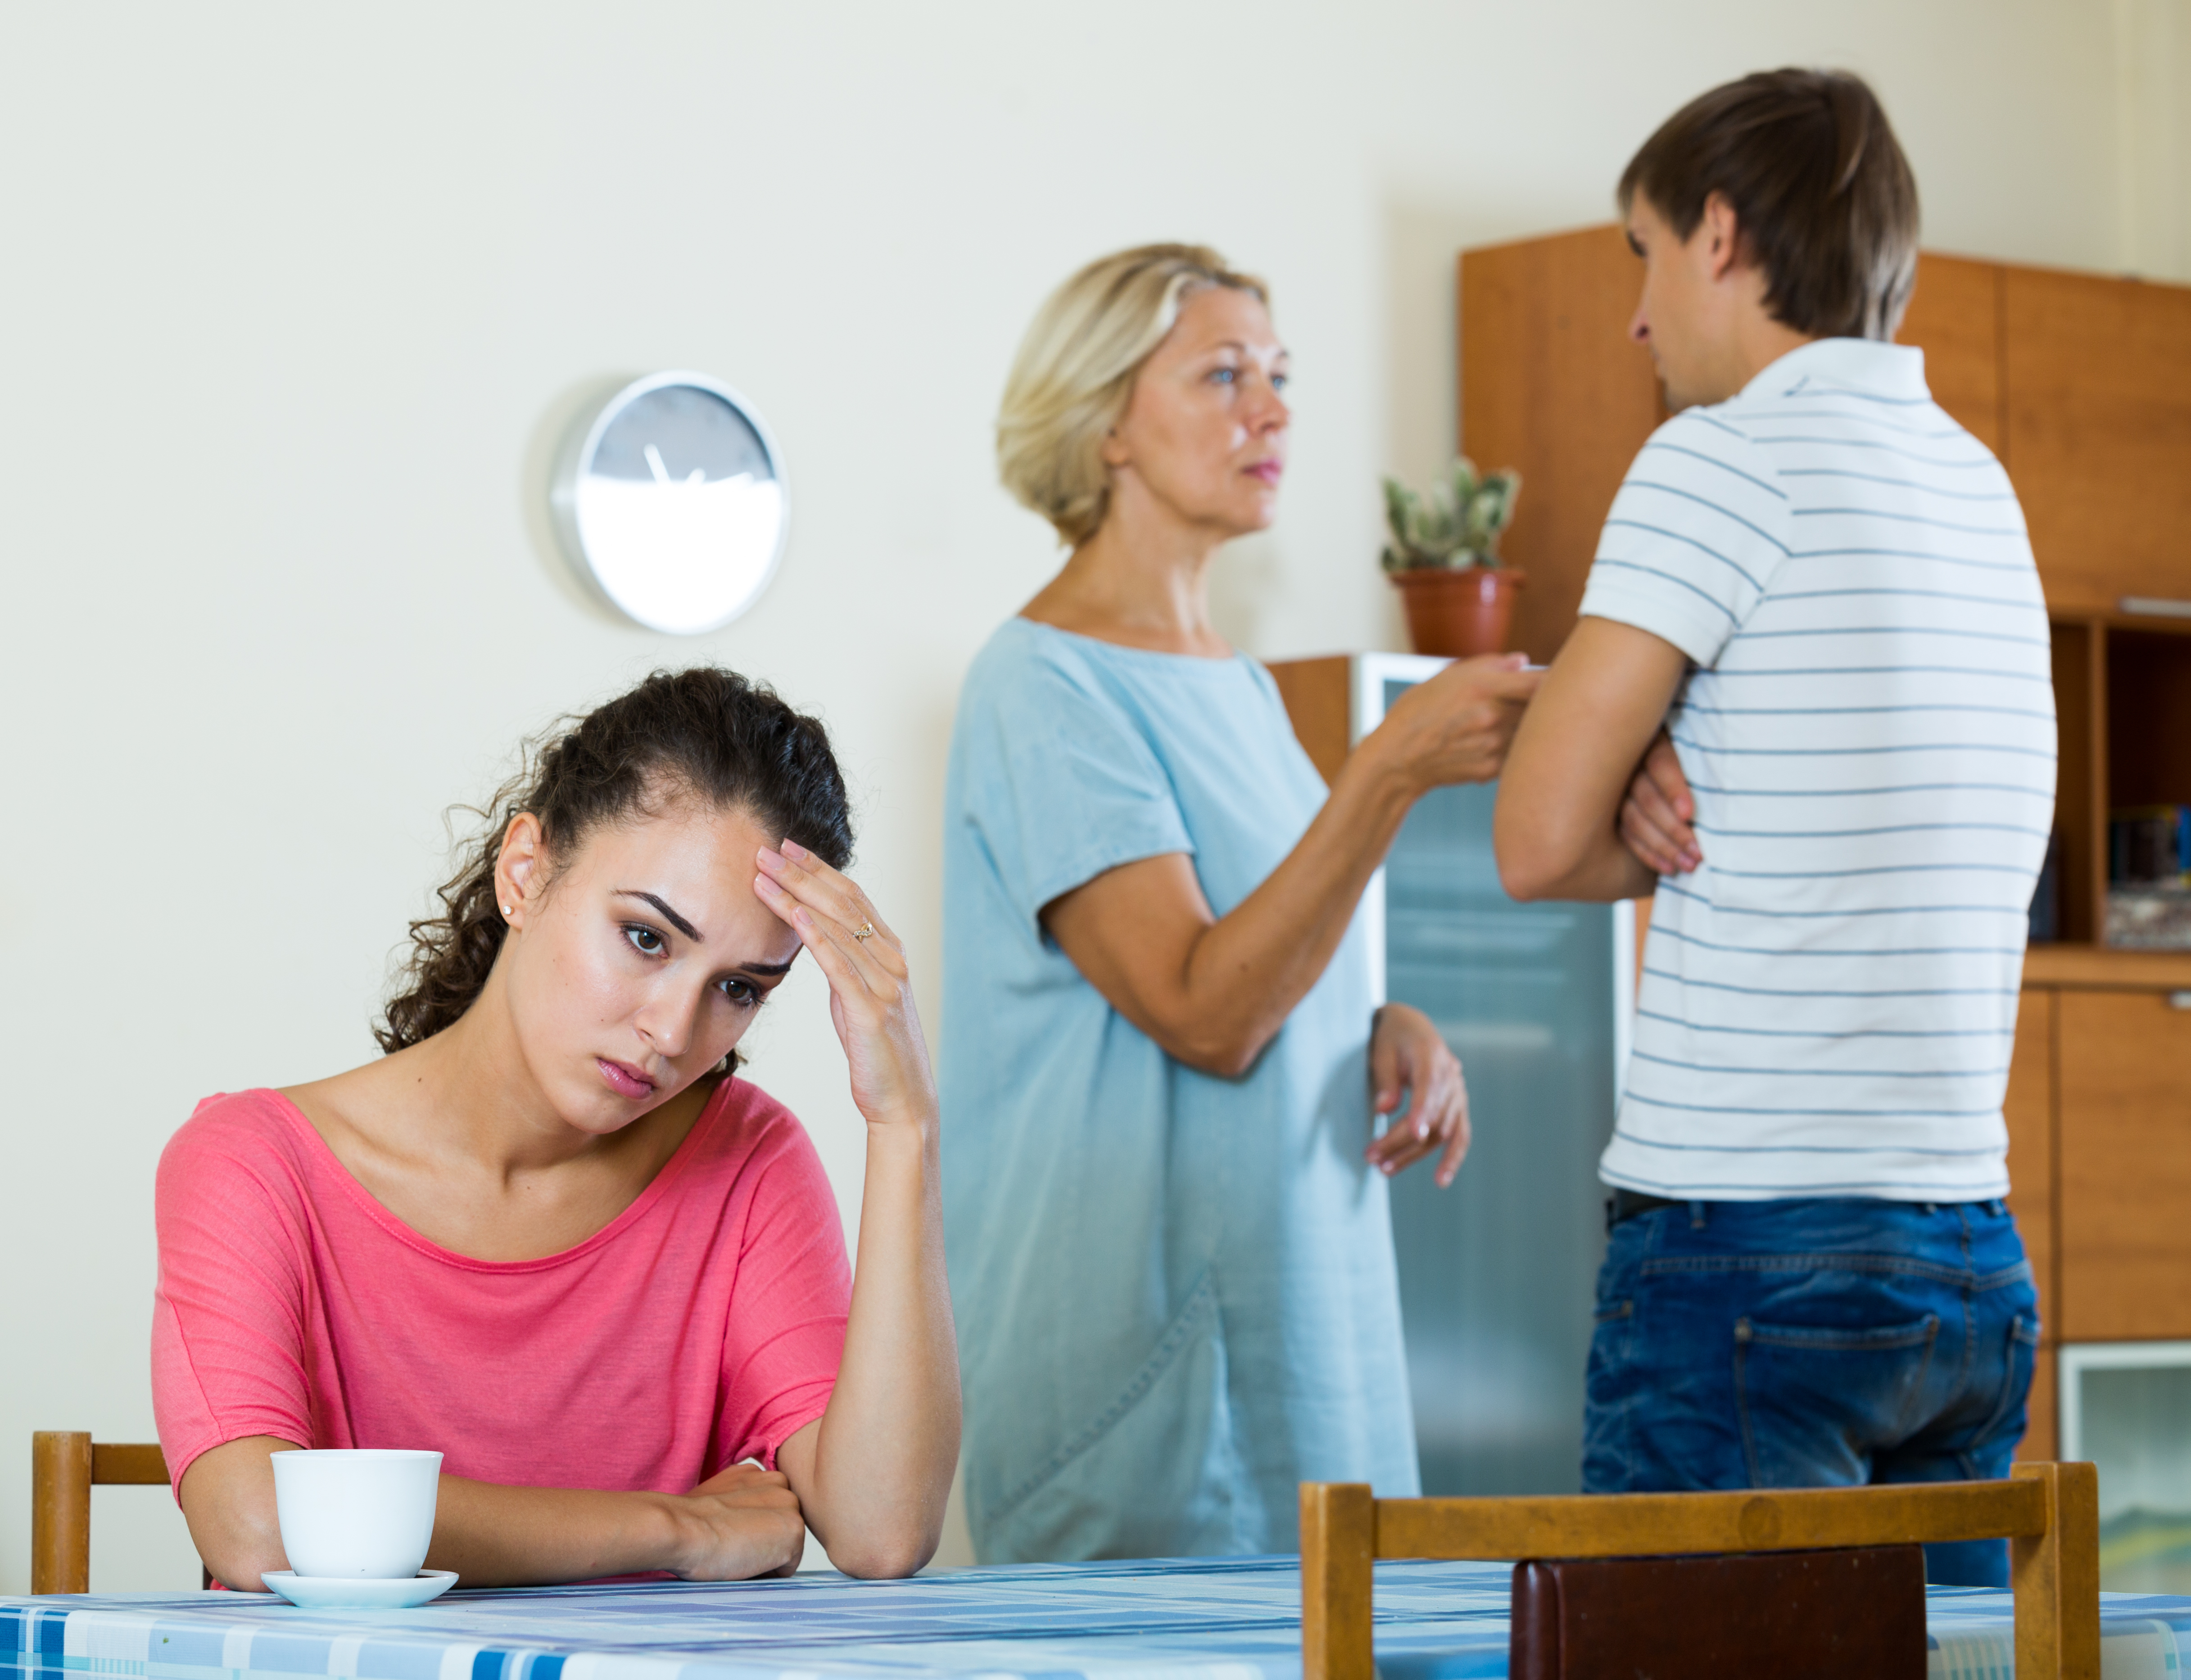 An upset young woman with her husband and mother arguing in the background | Source: Shutterstock